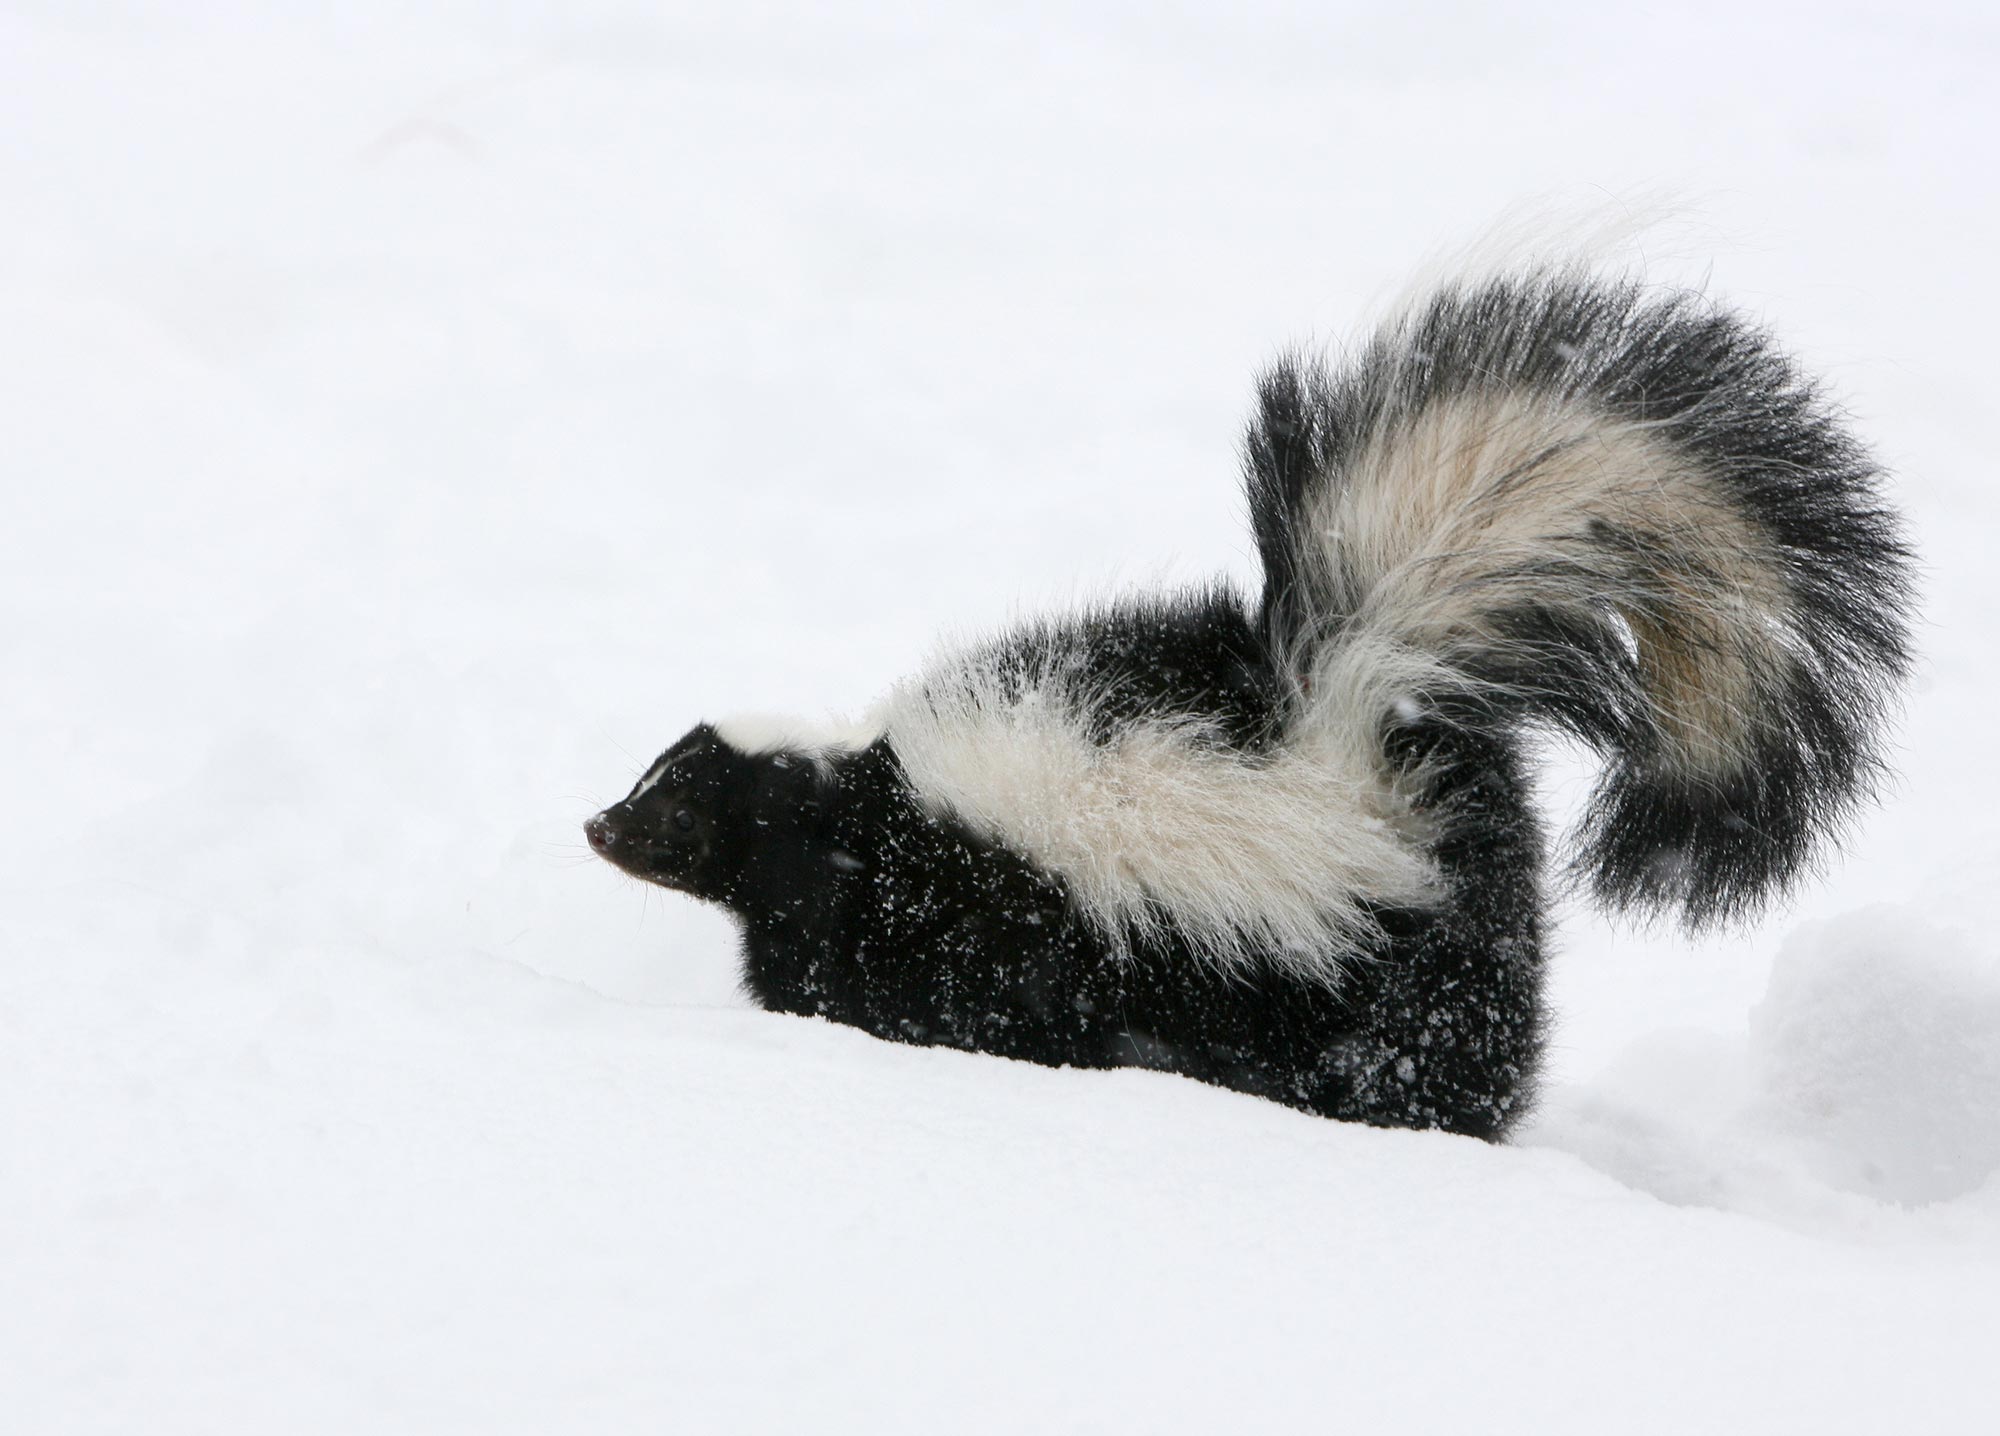 A skunk in a snow-covered field.